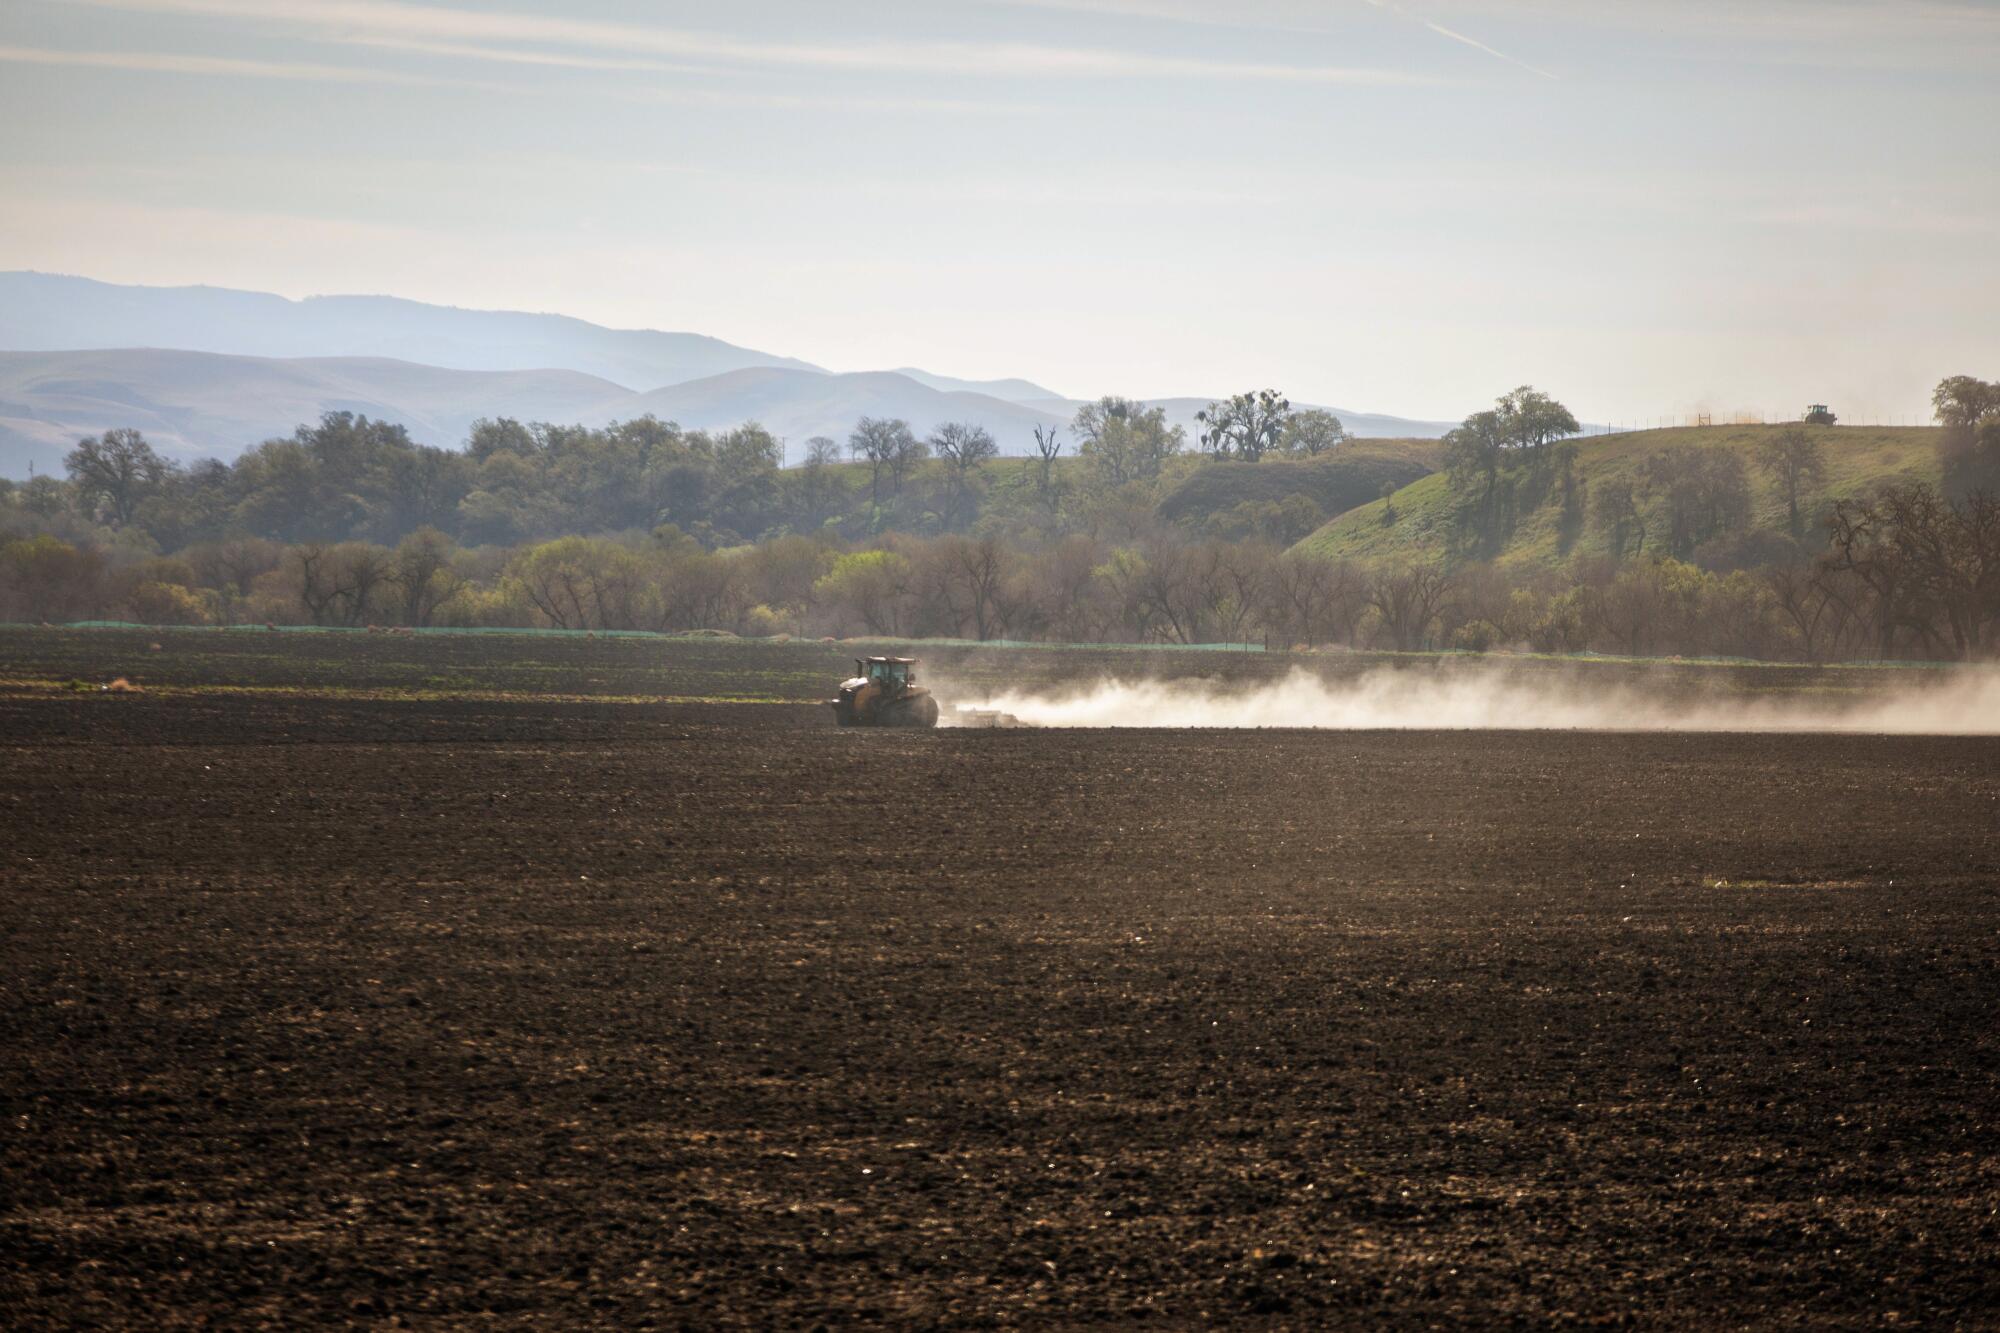 A tractor plows a field in the Central Valley, where valley fever has increased in frequency.